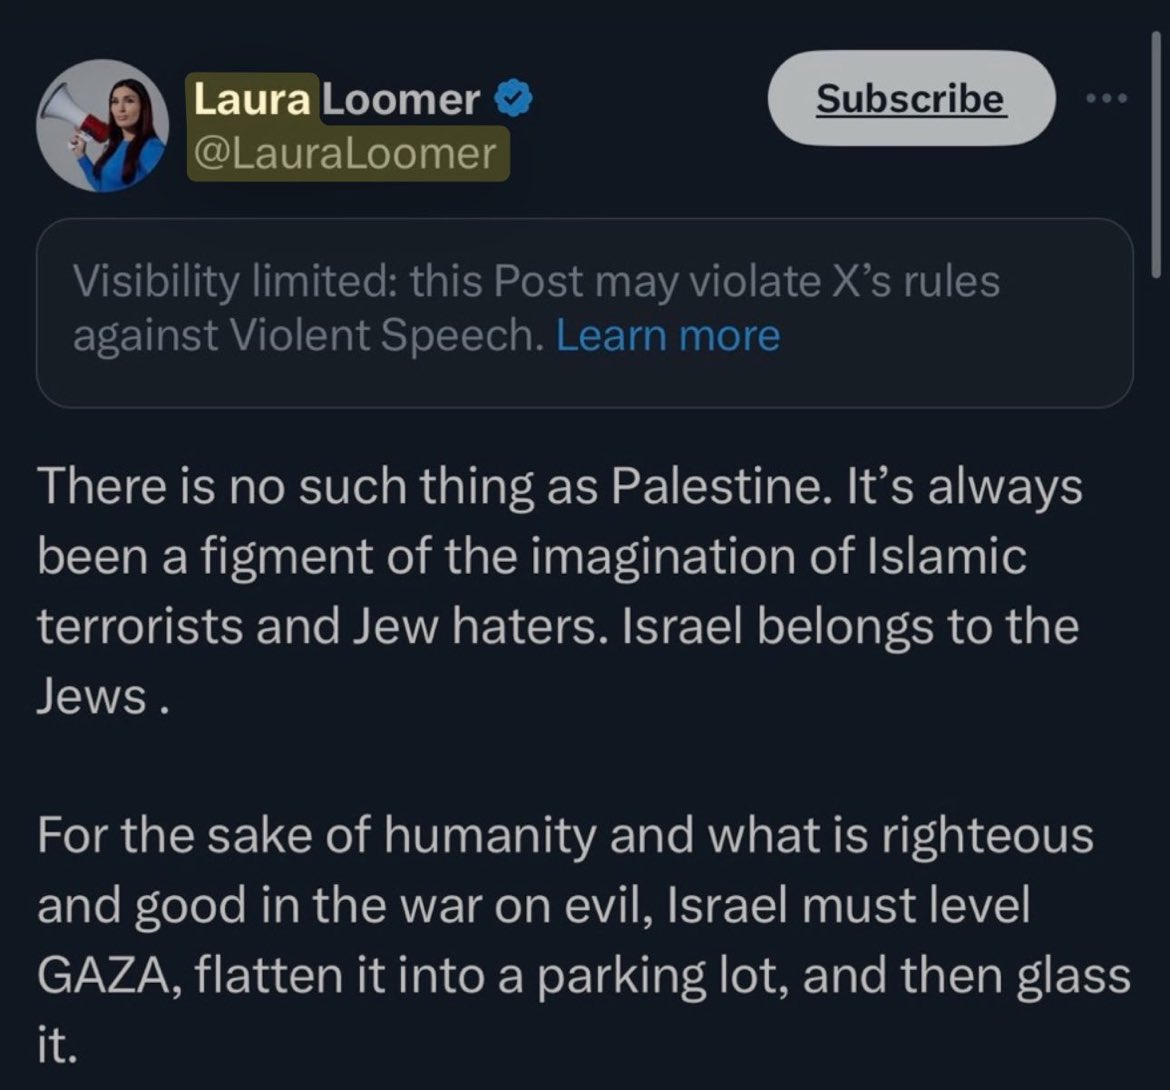 How in gods name does she get away with tweeting out such vitriol?? “Level Gaza and turn it into a parking lot” May I remind everybody that over 500,000 children are in Gaza if not more like seriously wtf???